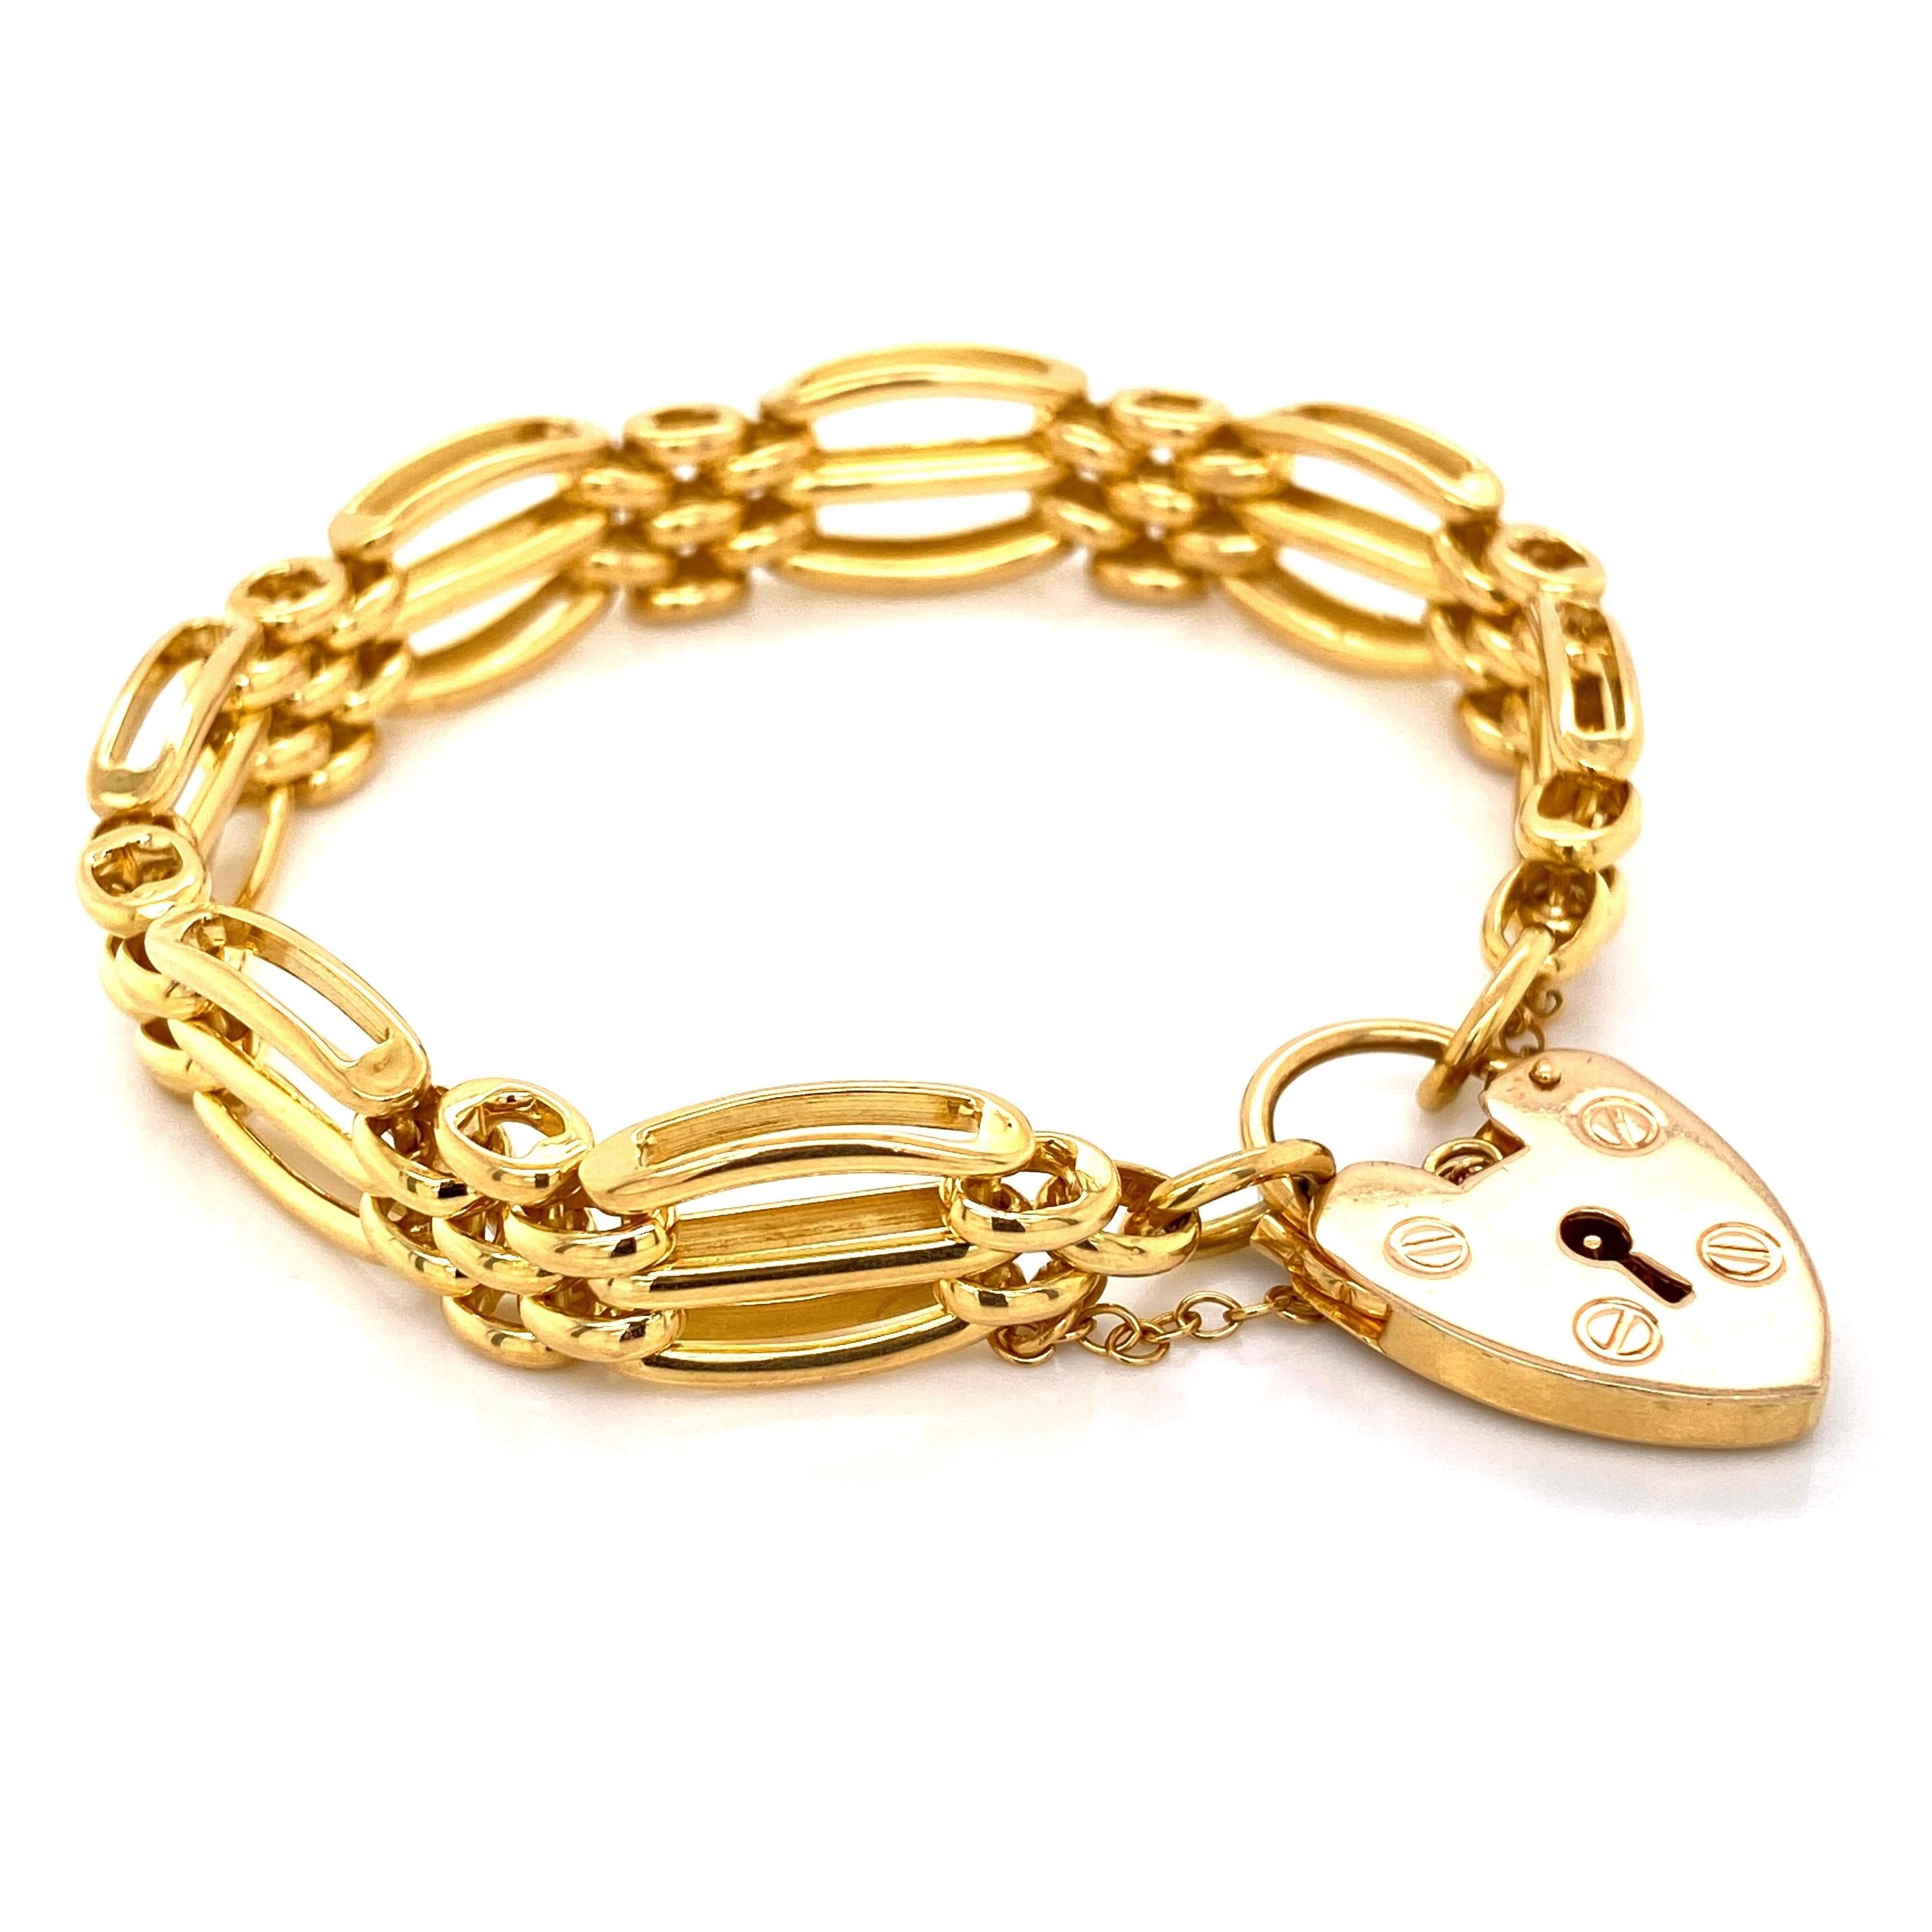 Vintage Charles Green & Son Padlock Gold Link Bracelet English Fine Jewelry In Excellent Condition For Sale In Montreal, QC